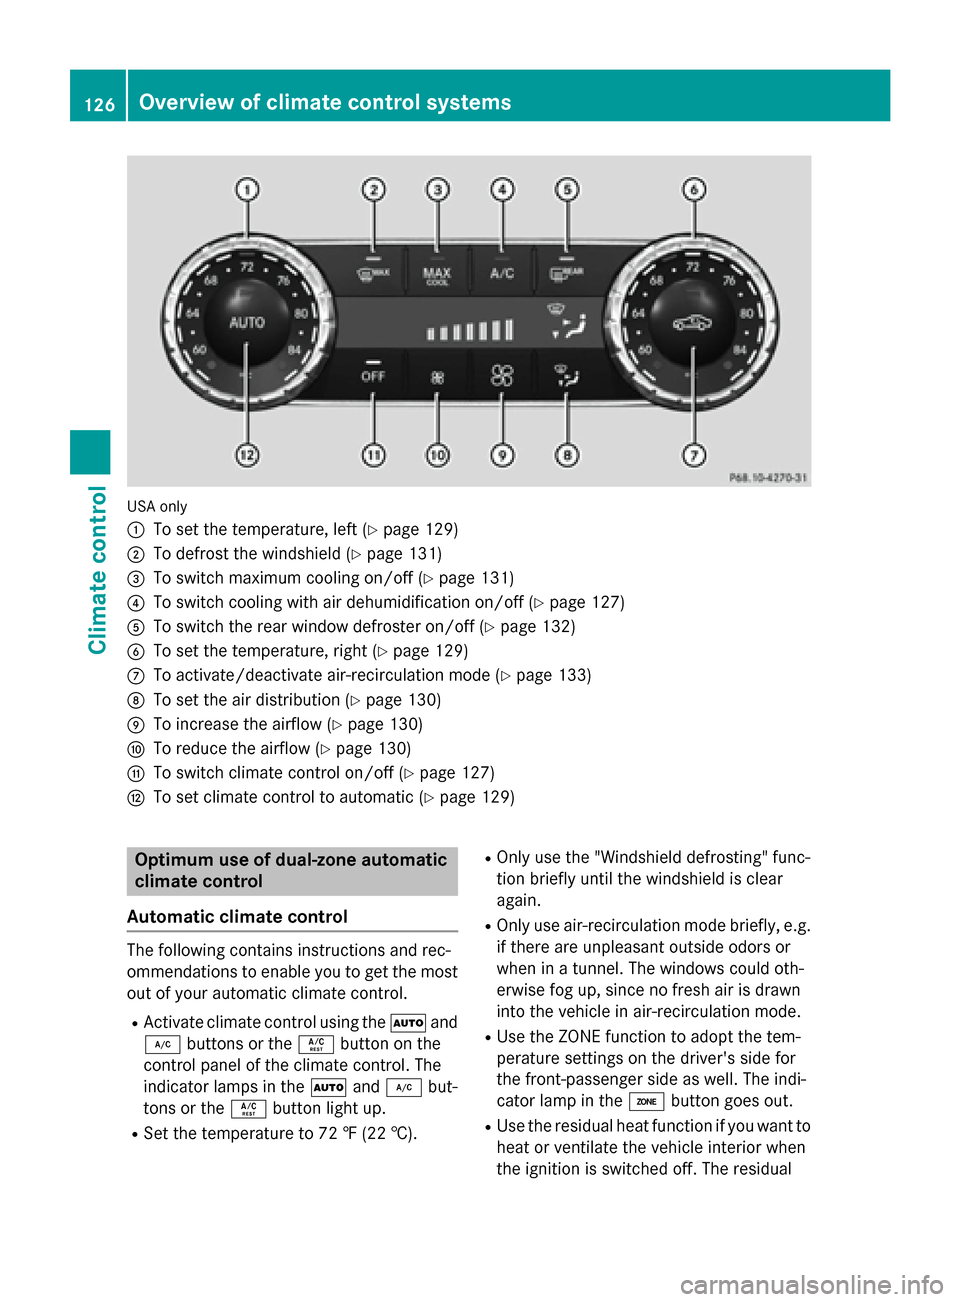 MERCEDES-BENZ SLK-Class 2015 R172 Owners Manual USA only
0043
To set the temperature, left (Y page 129)
0044 To defrost the windshield (Y page 131)
0087 To switch maximum cooling on/off (Y page 131)
0085 To switch cooling with air dehumidification 